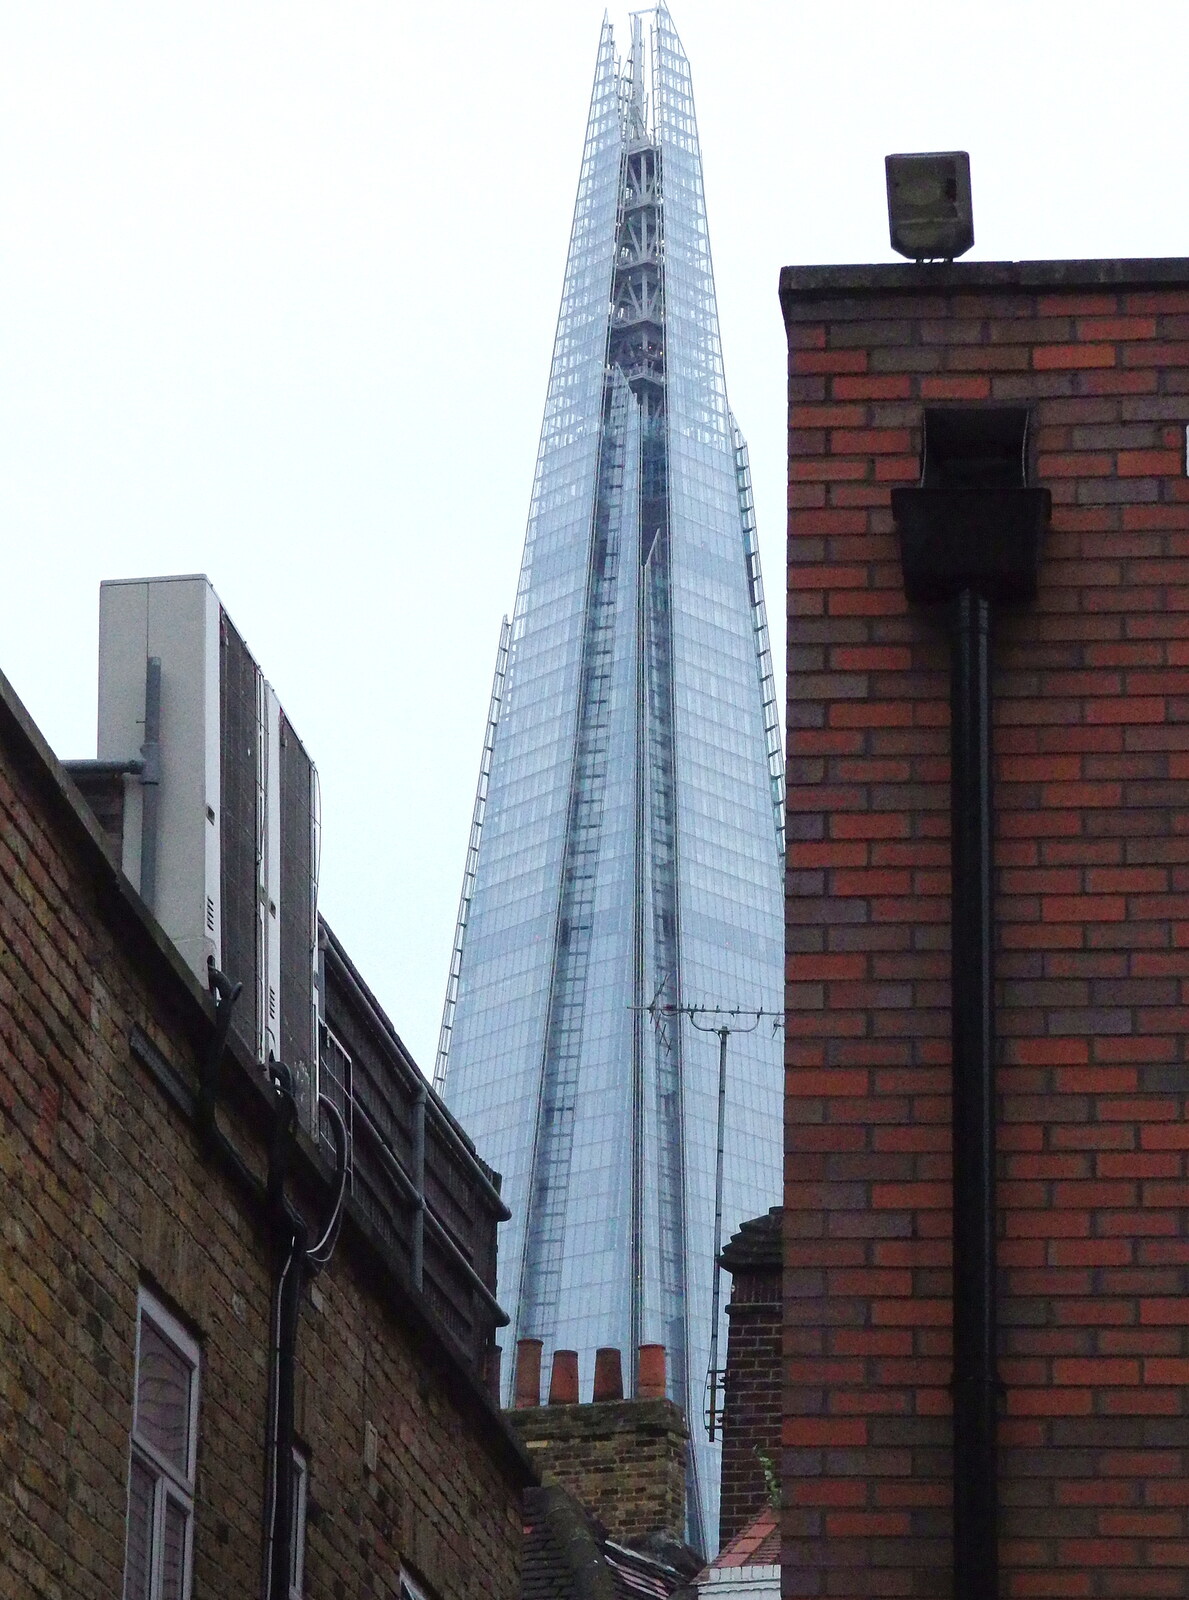 SwiftKey's Arcade Cabinet, and the Streets of Southwark, London - 5th December 2013: The Shard from Flatiron Yard